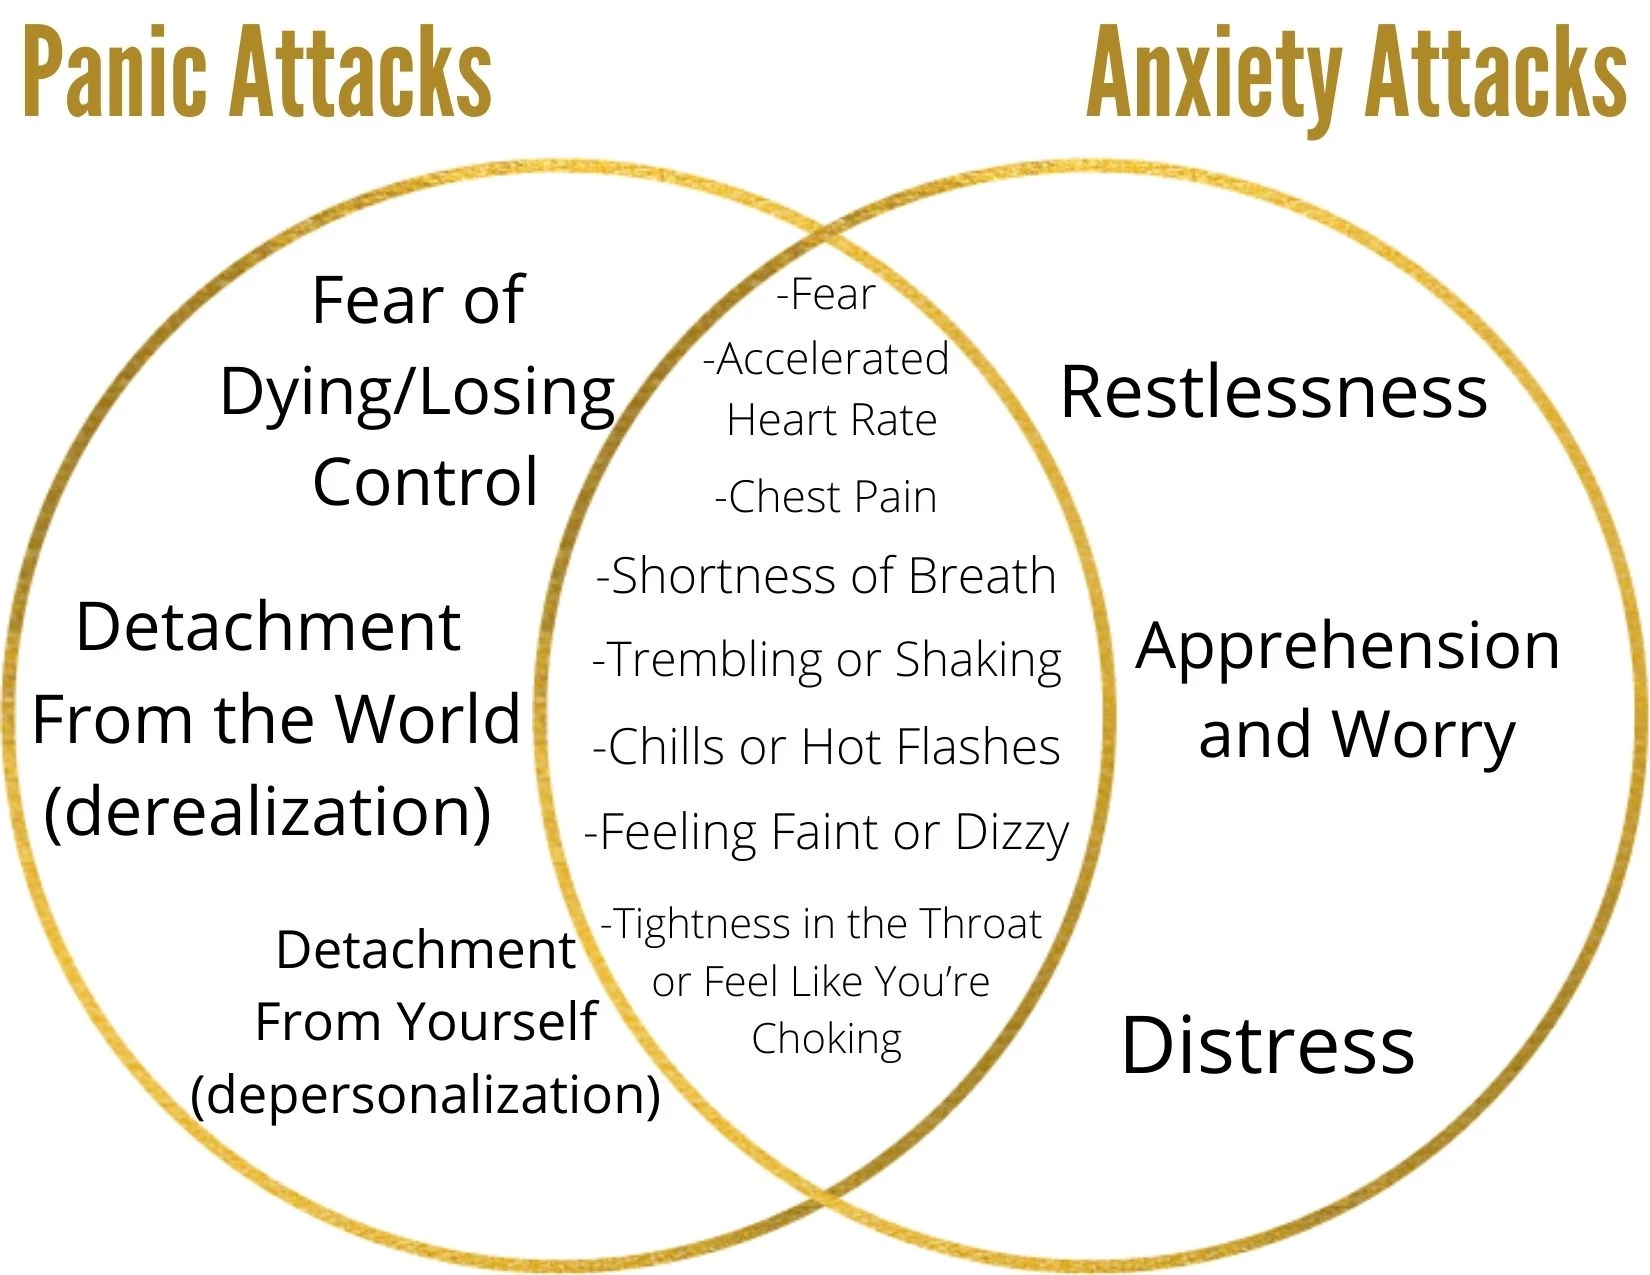 Panic attack vs anxiety attack